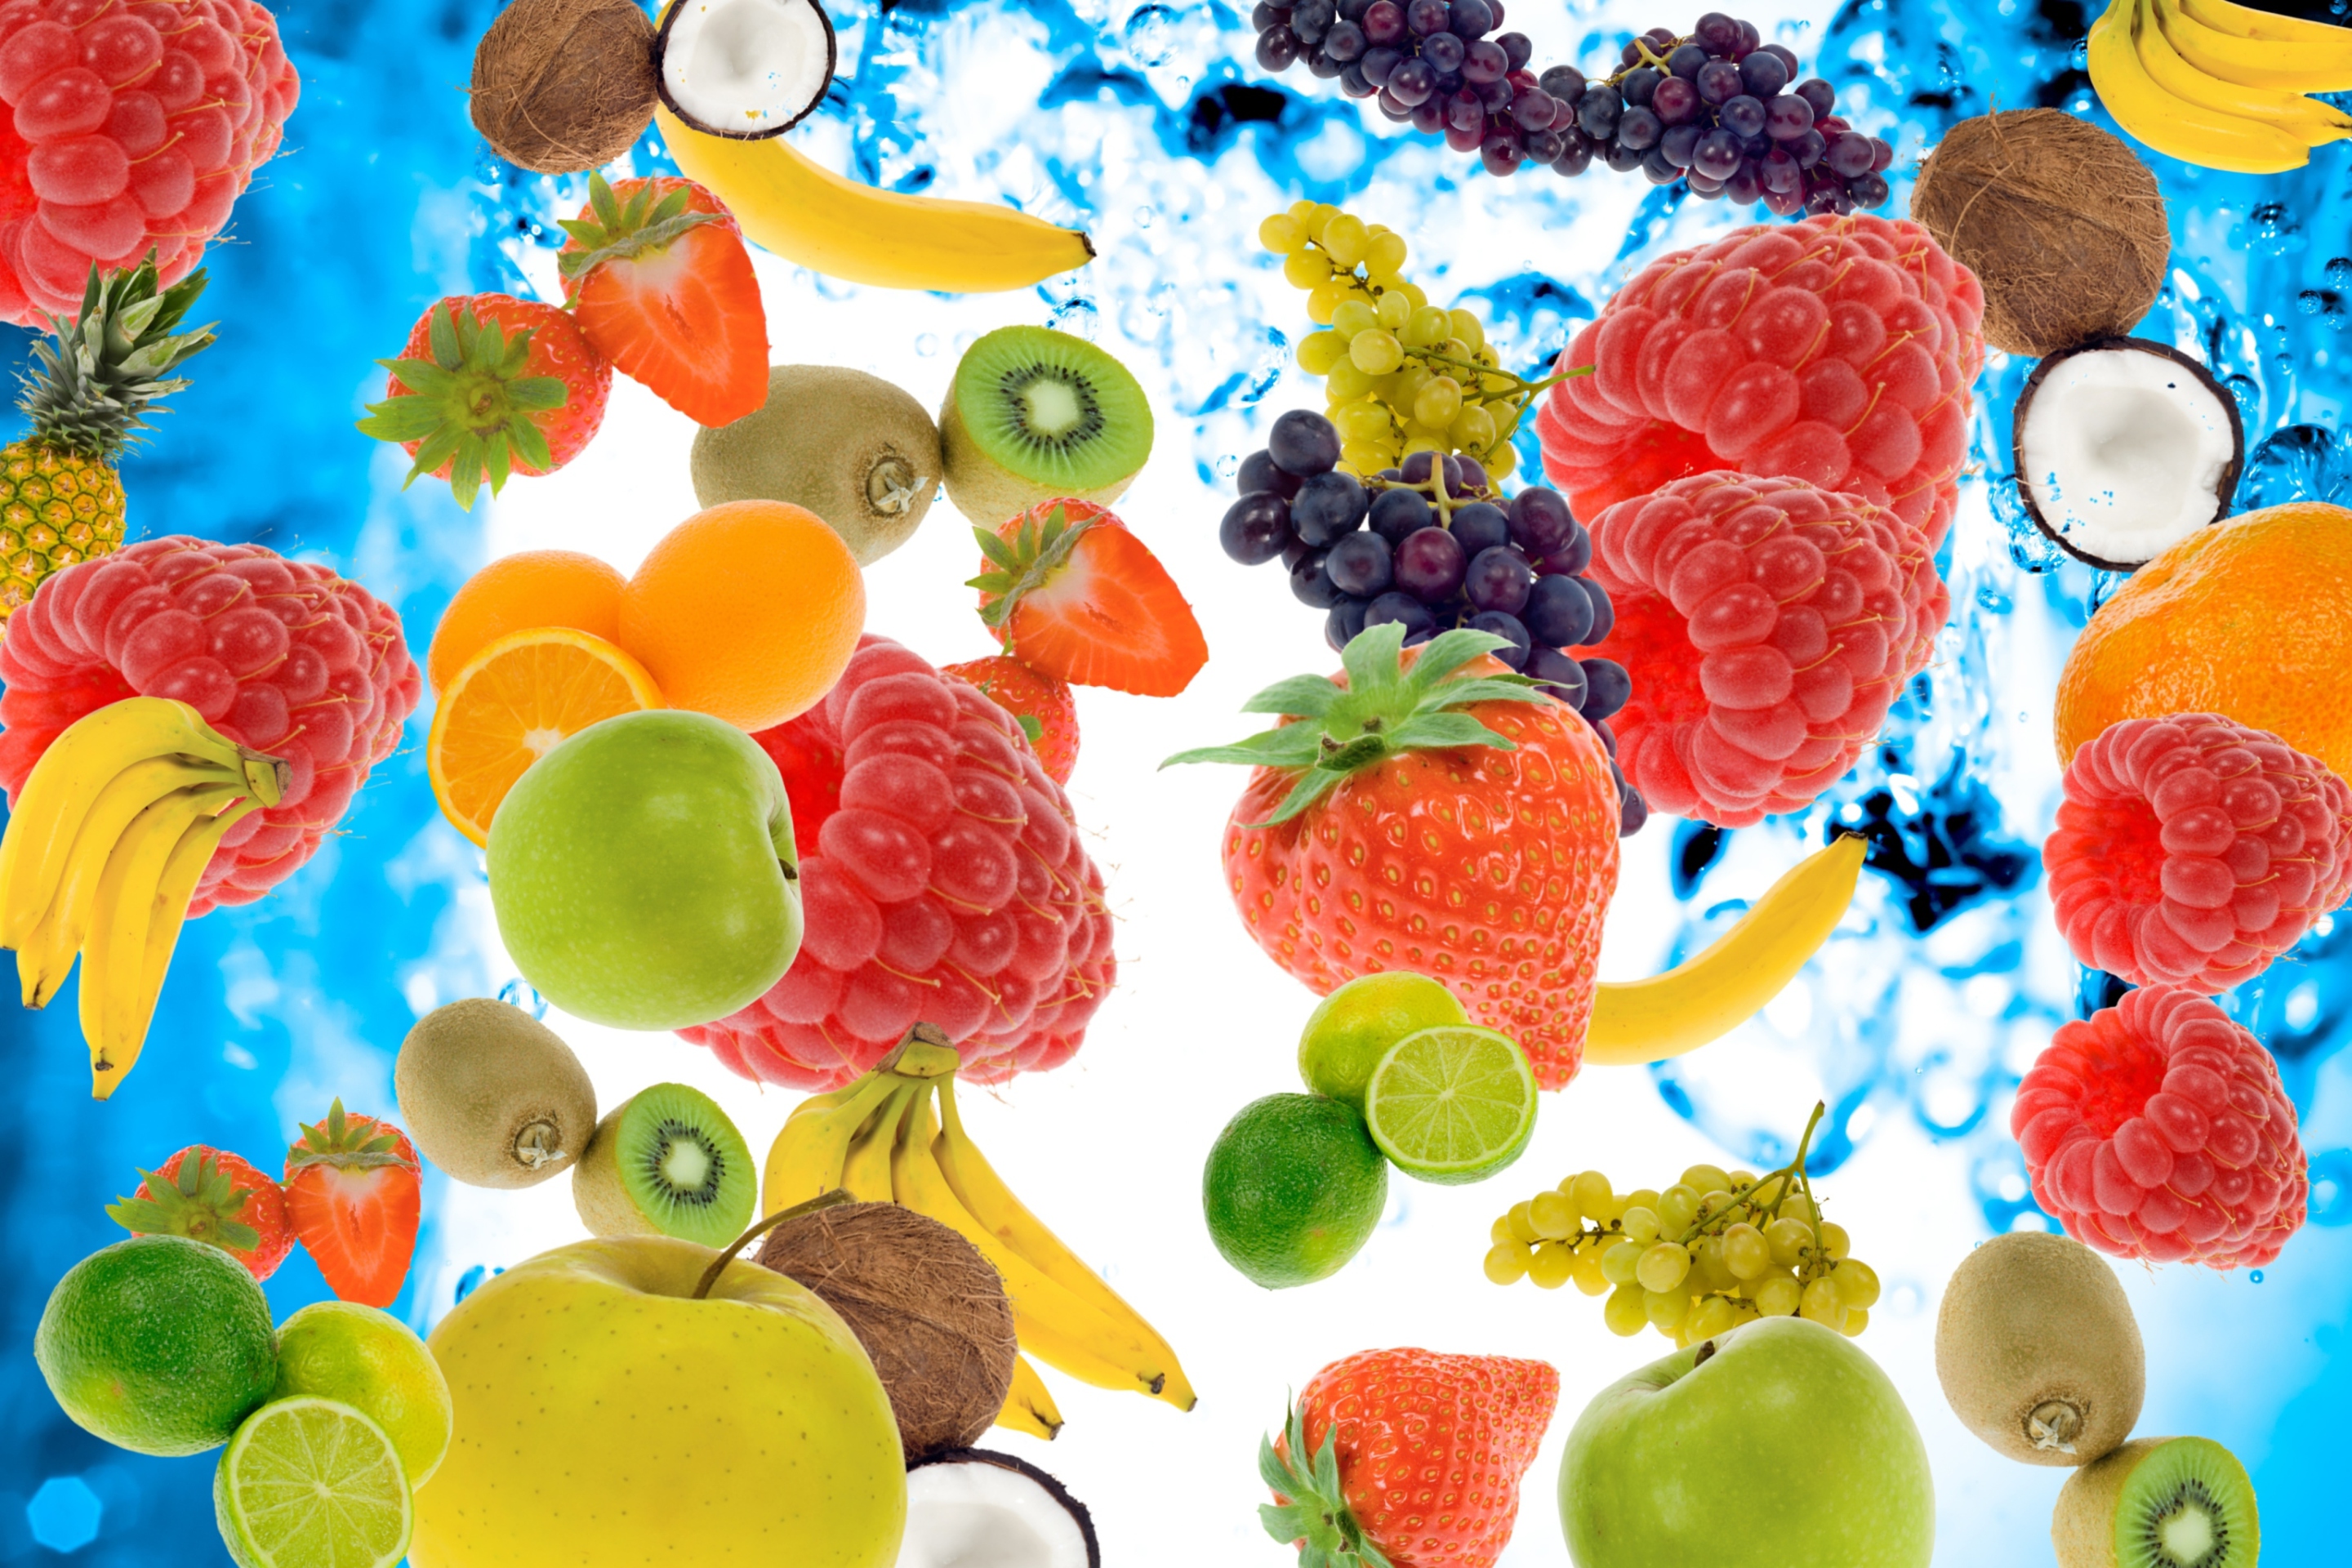 Berries And Fruits wallpaper 2880x1920